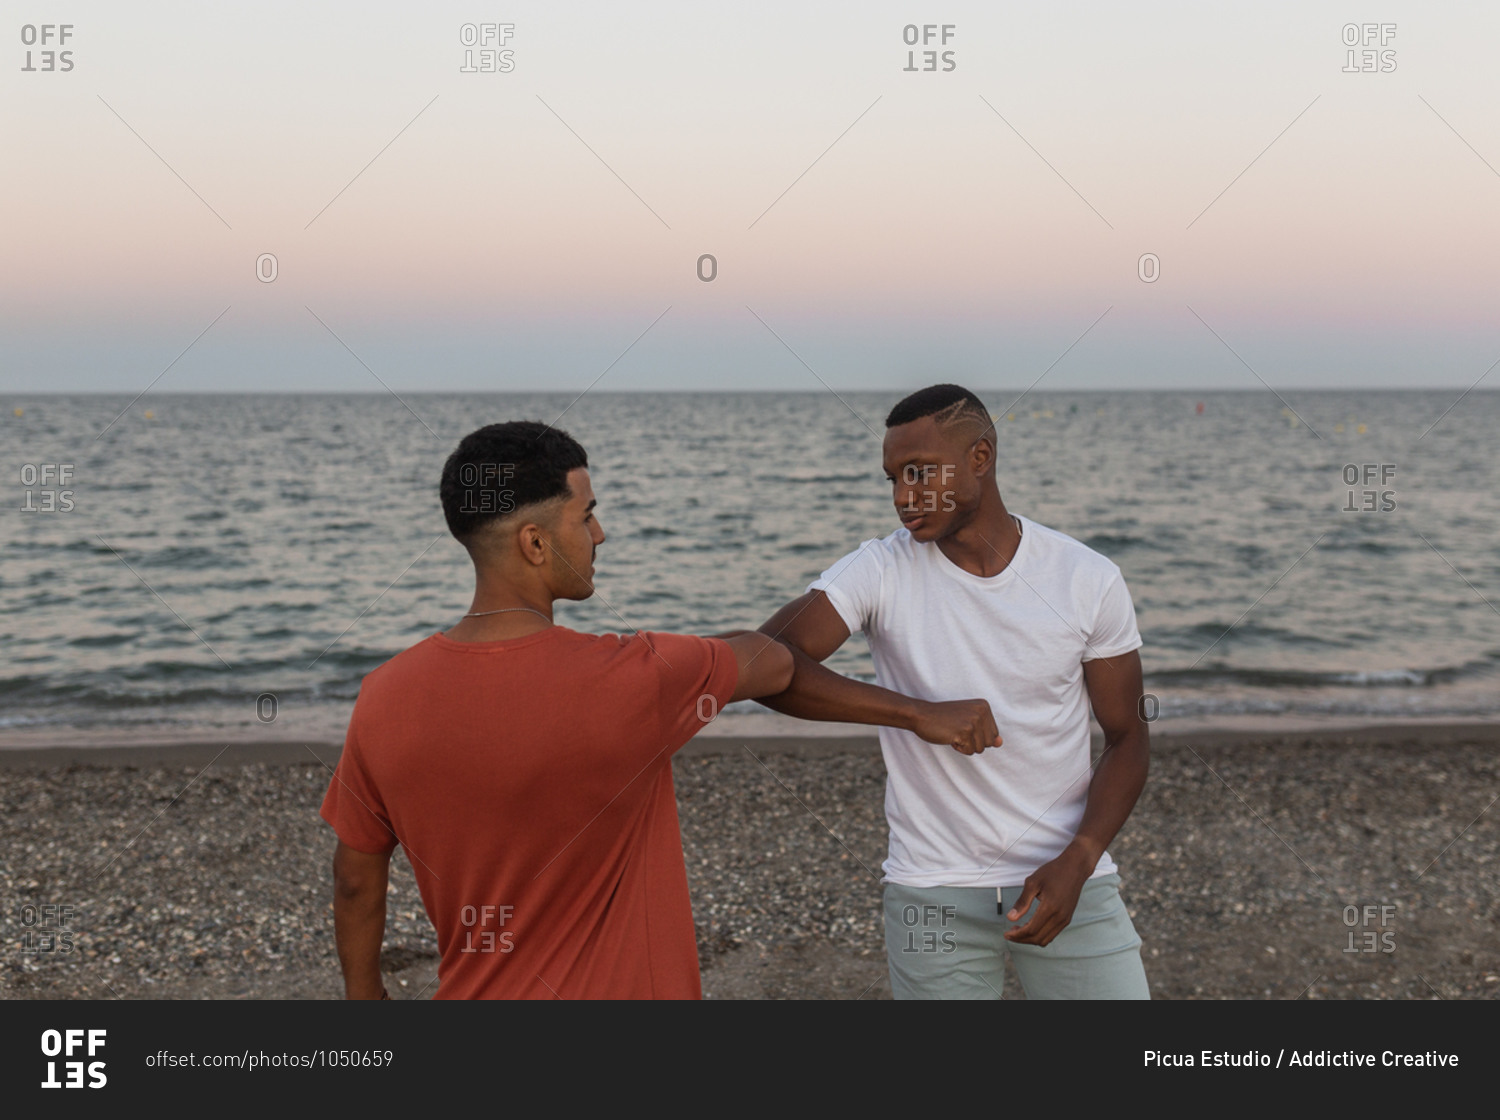 Young trendy African American male partners with modern haircuts greeting each other while bumping elbows on beach near wavy ocean at sunset